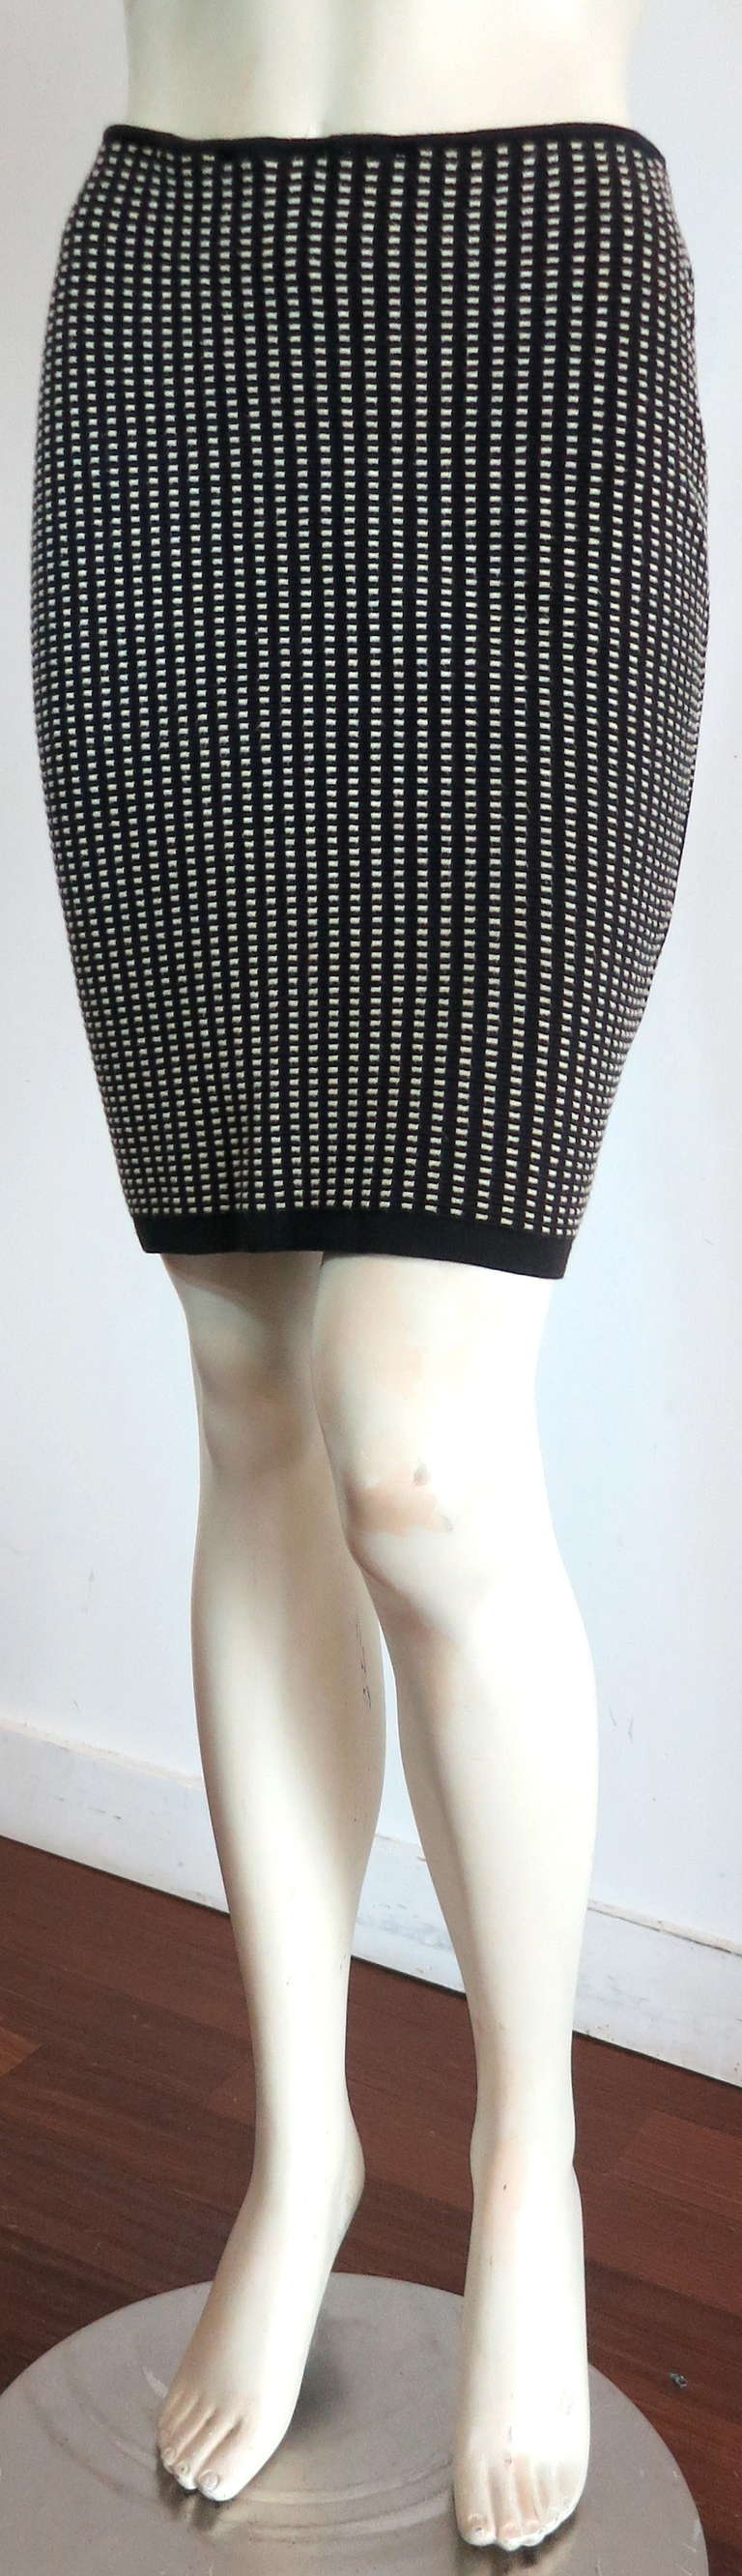 Vintage ALAIA Knit skirt featuring black ribbed base with white dash striped patterning.

This great skirt was designed by Azzedine Alaïa during the 1990's in France.

Sexy, body-con silhouette.

Stretchy fabrication.

In good condition with